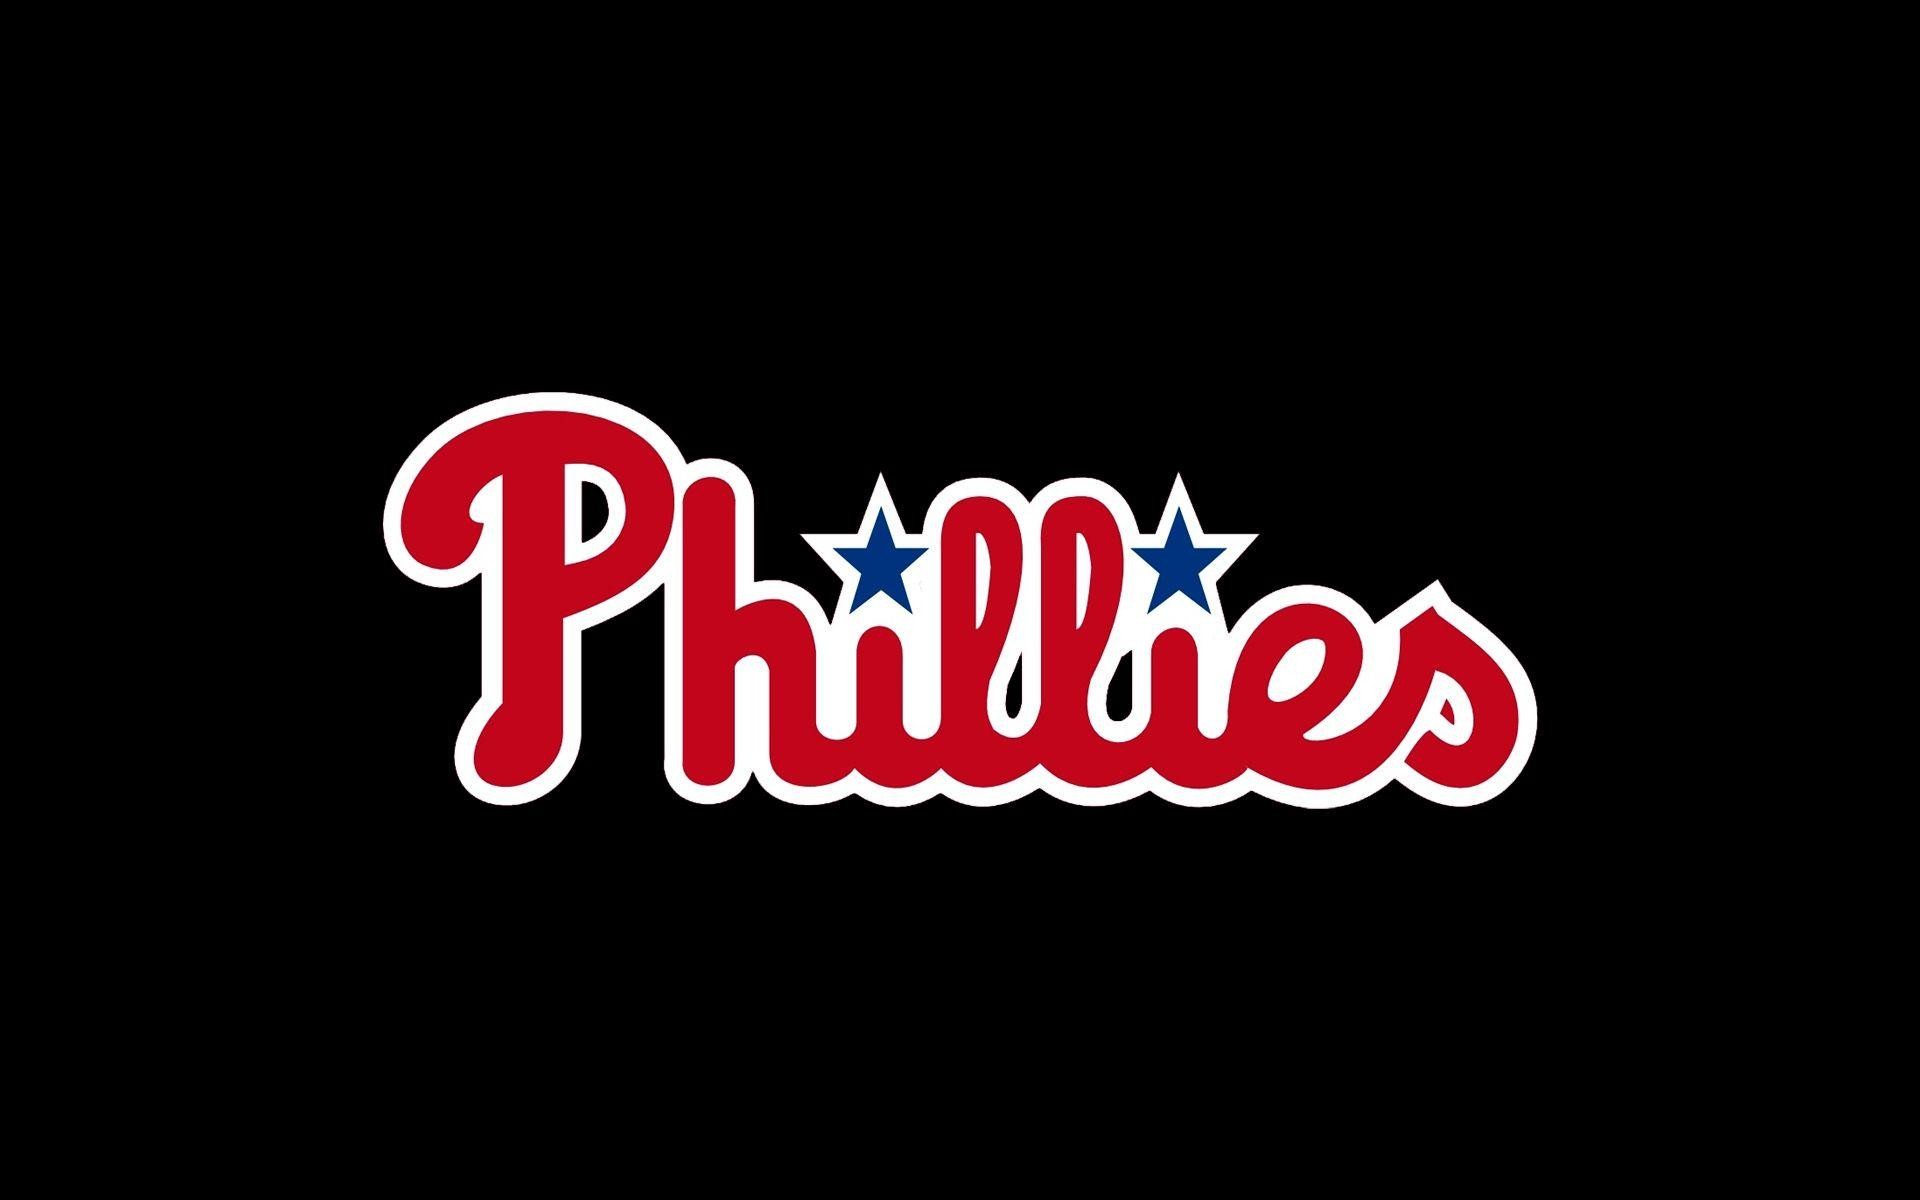 1920x1200 Phillies Logo Wallpaper Country 690 High Quality